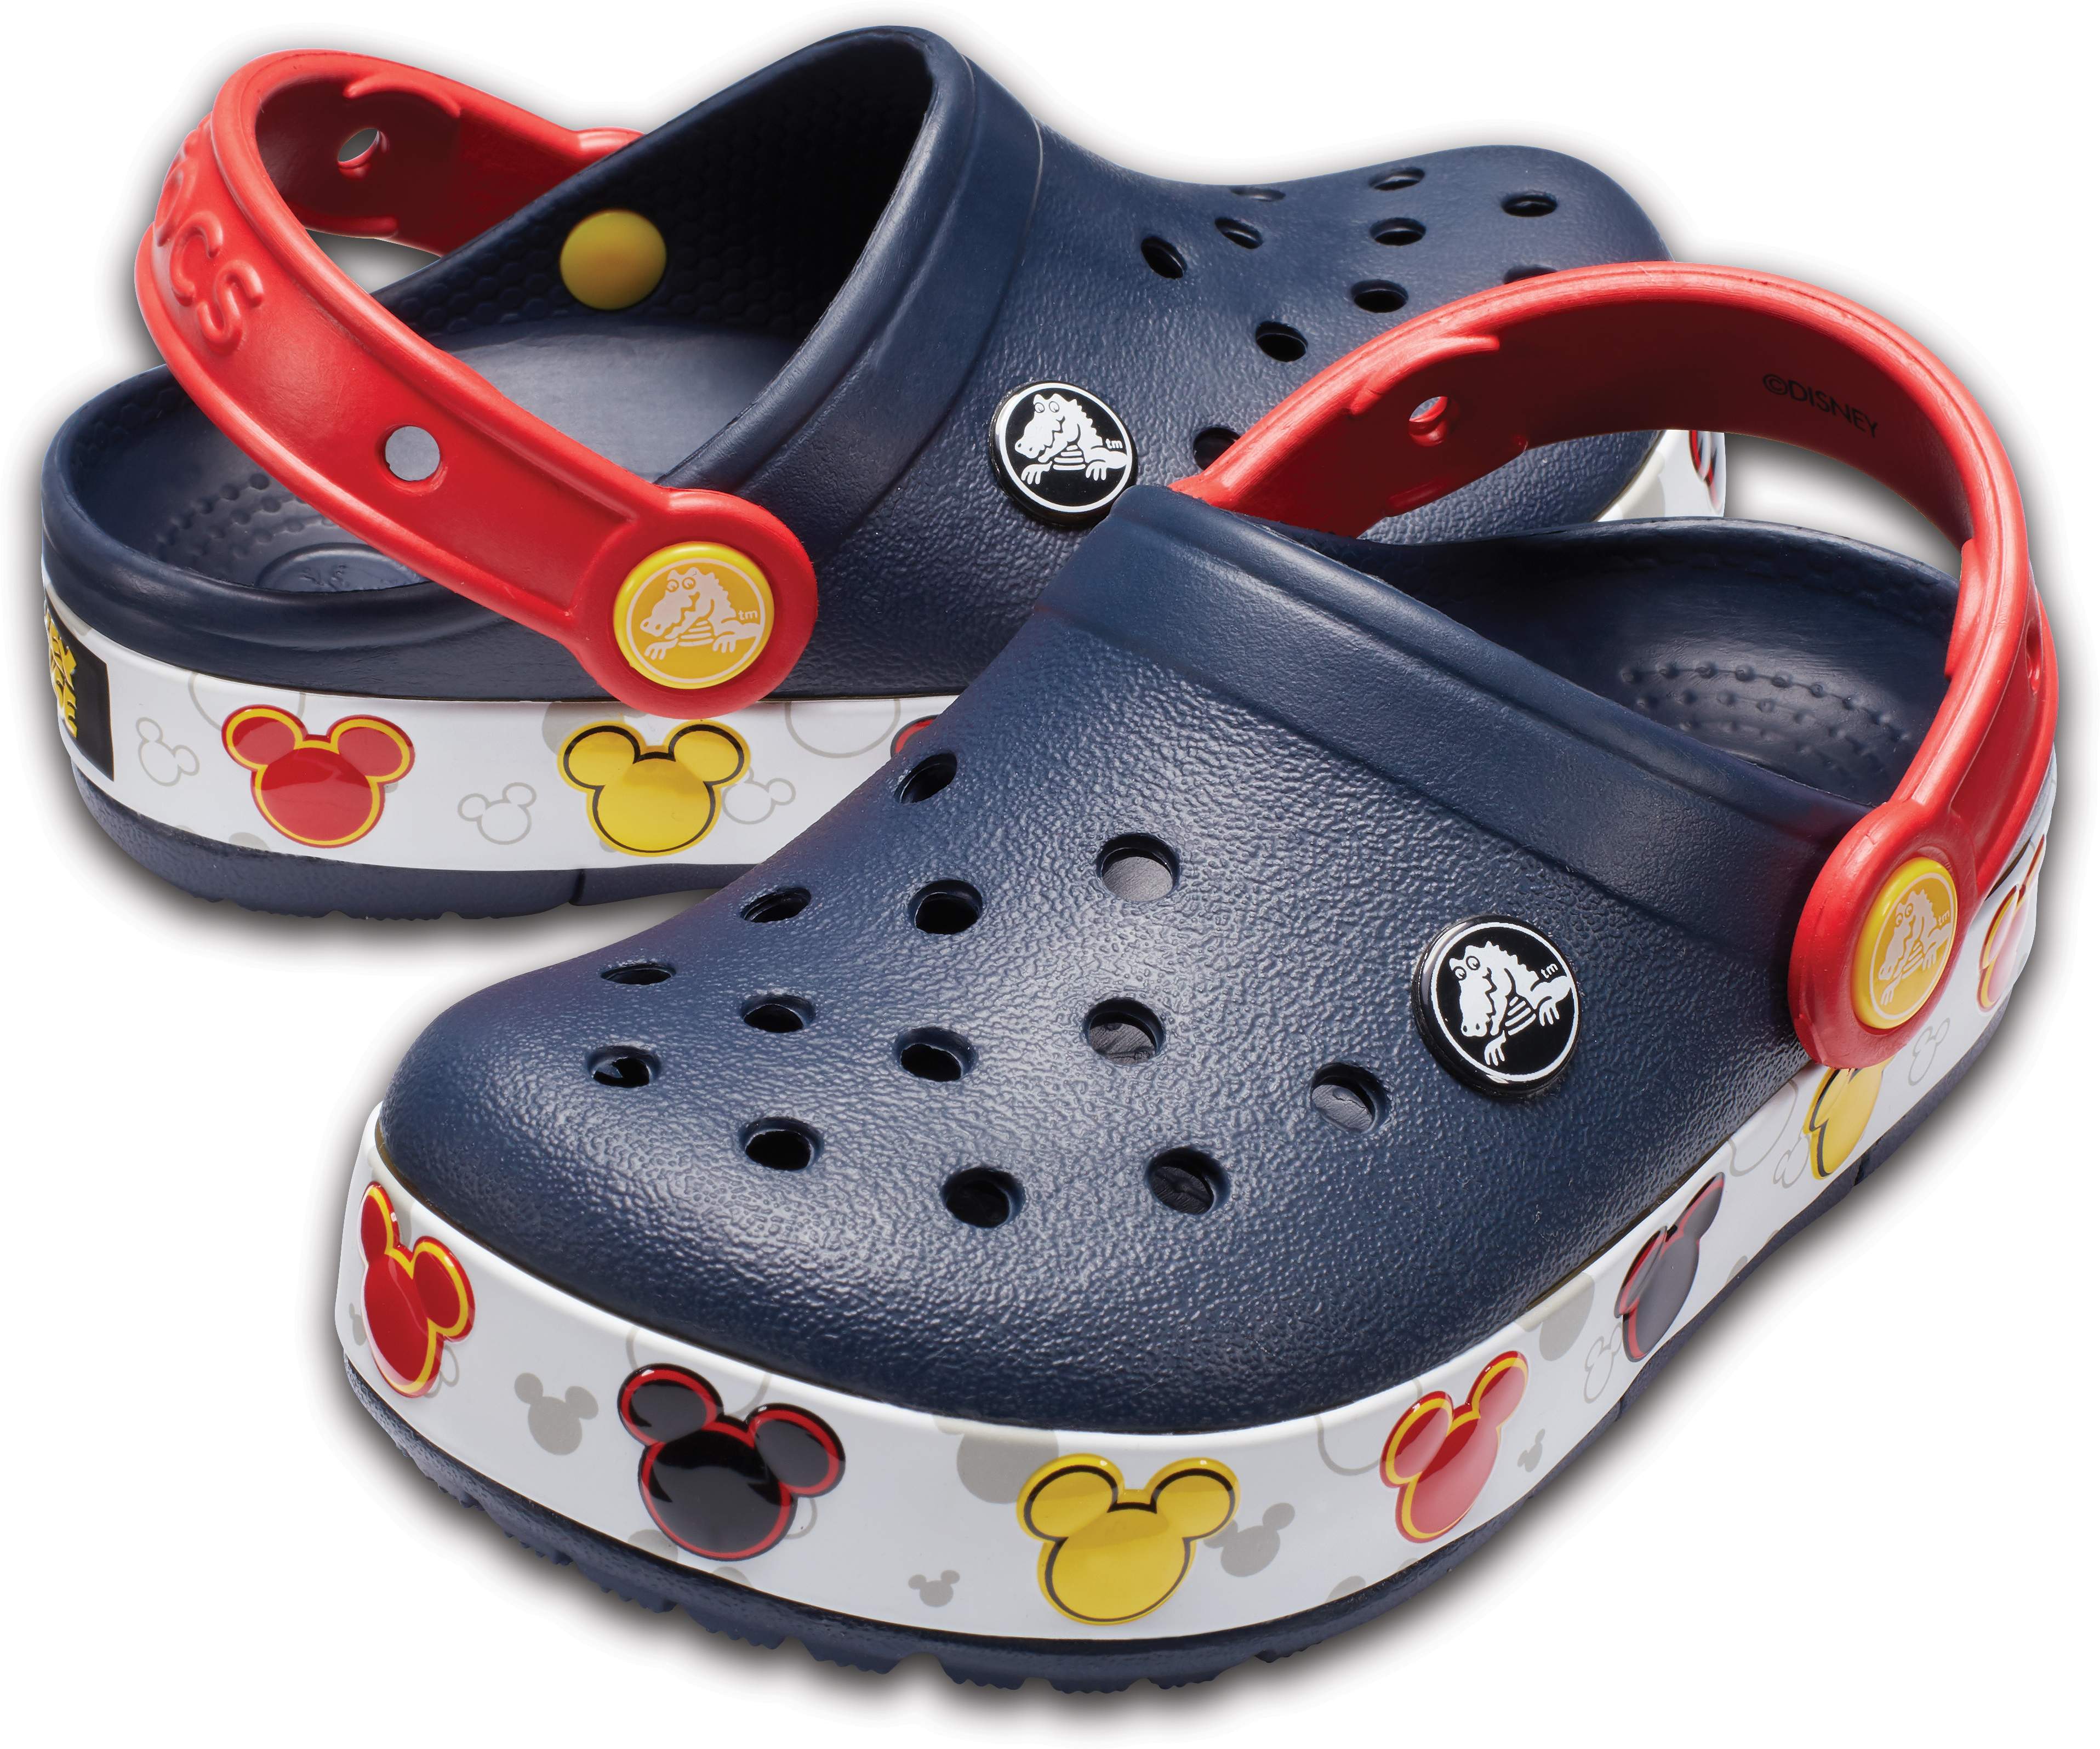 mickey mouse crocs for kids